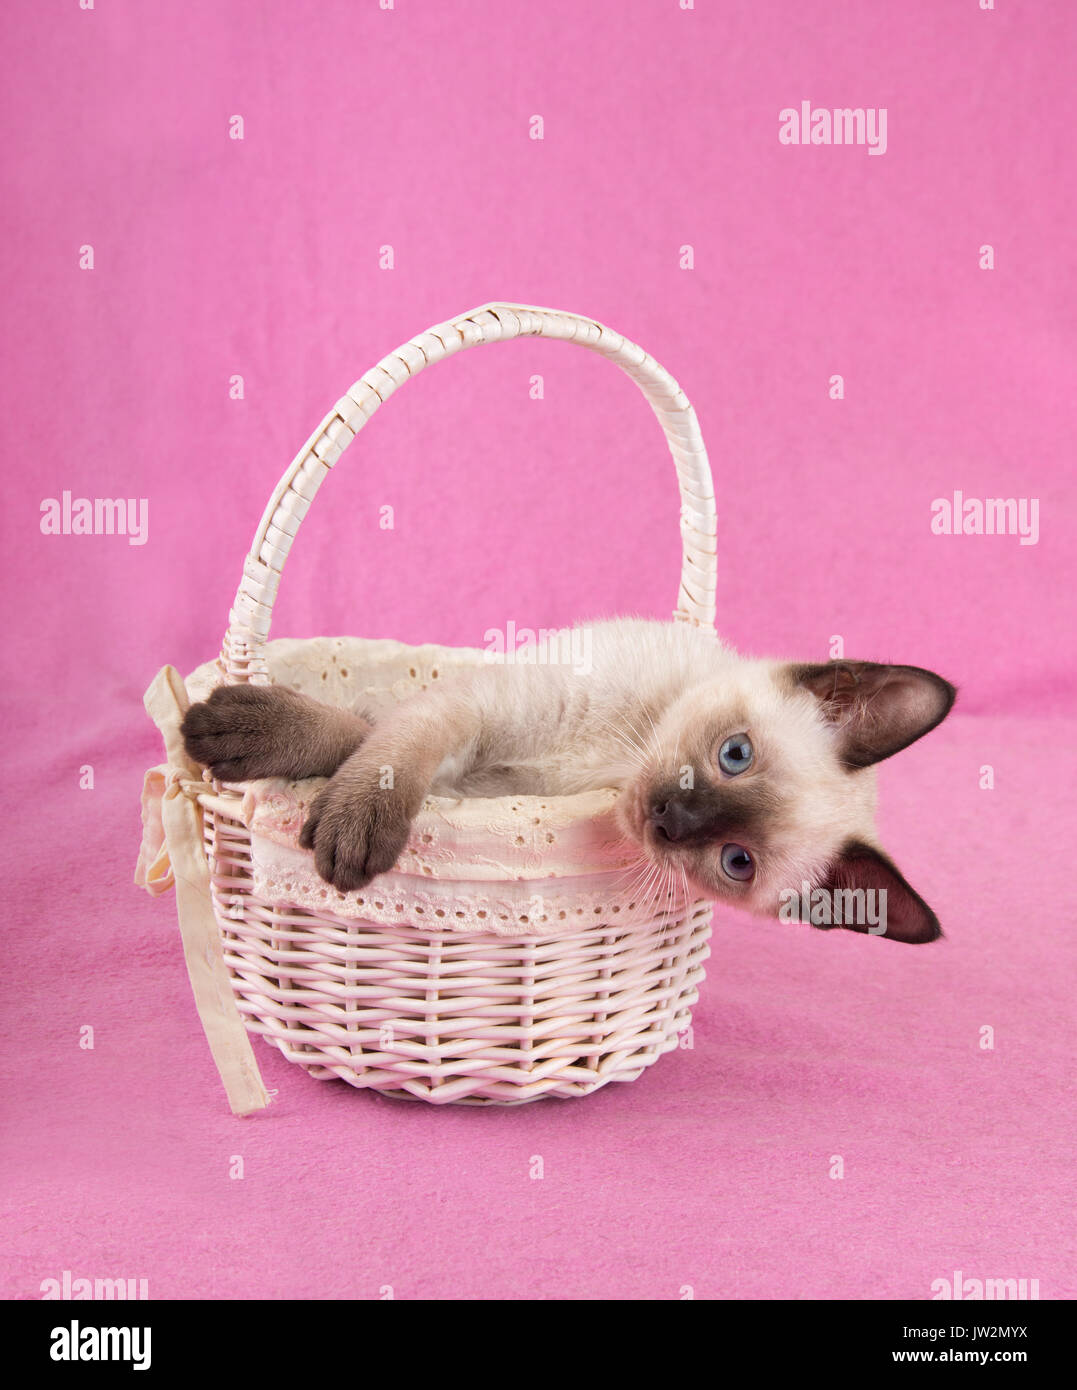 Adorable Siamese kitten in an off white basket, looking sideways at the viewer, with a pink background Stock Photo